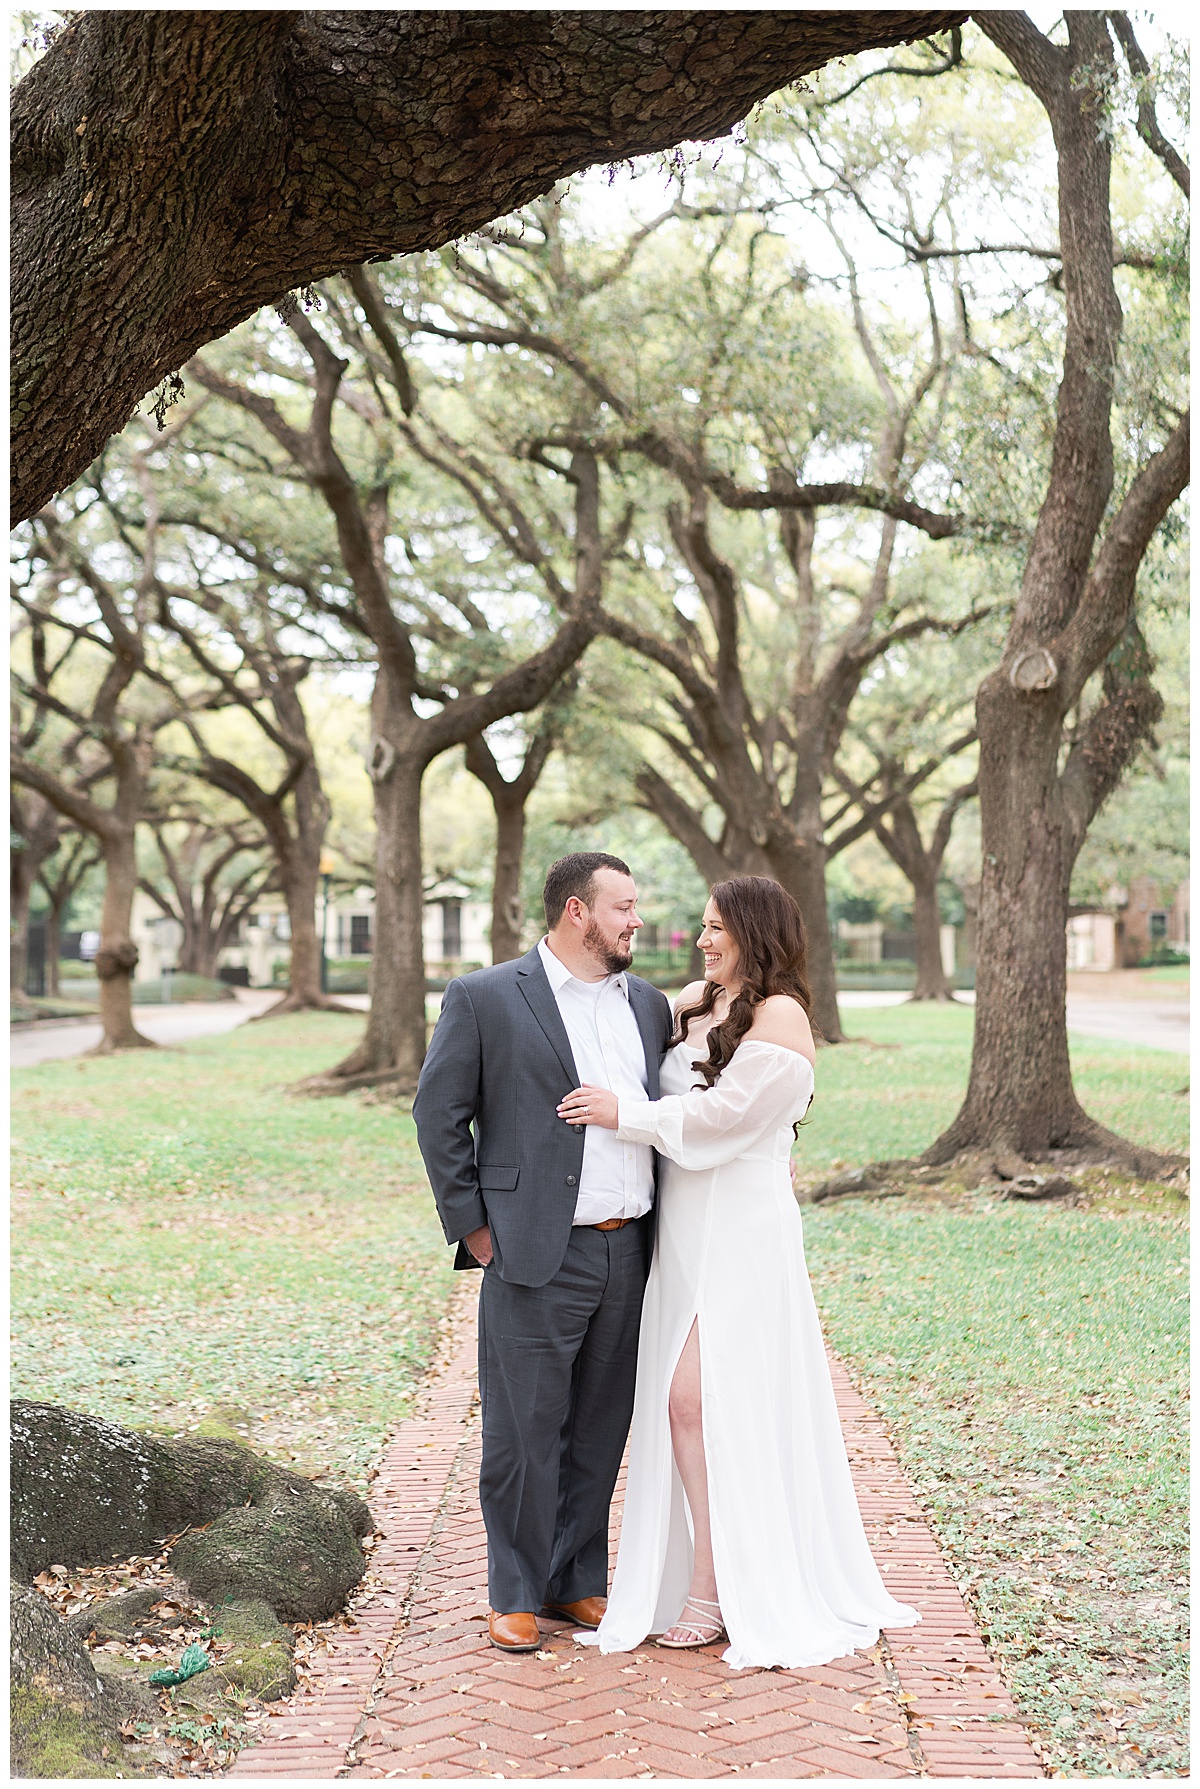 Couple smile at one another during their Boulevard Oaks Engagement Session